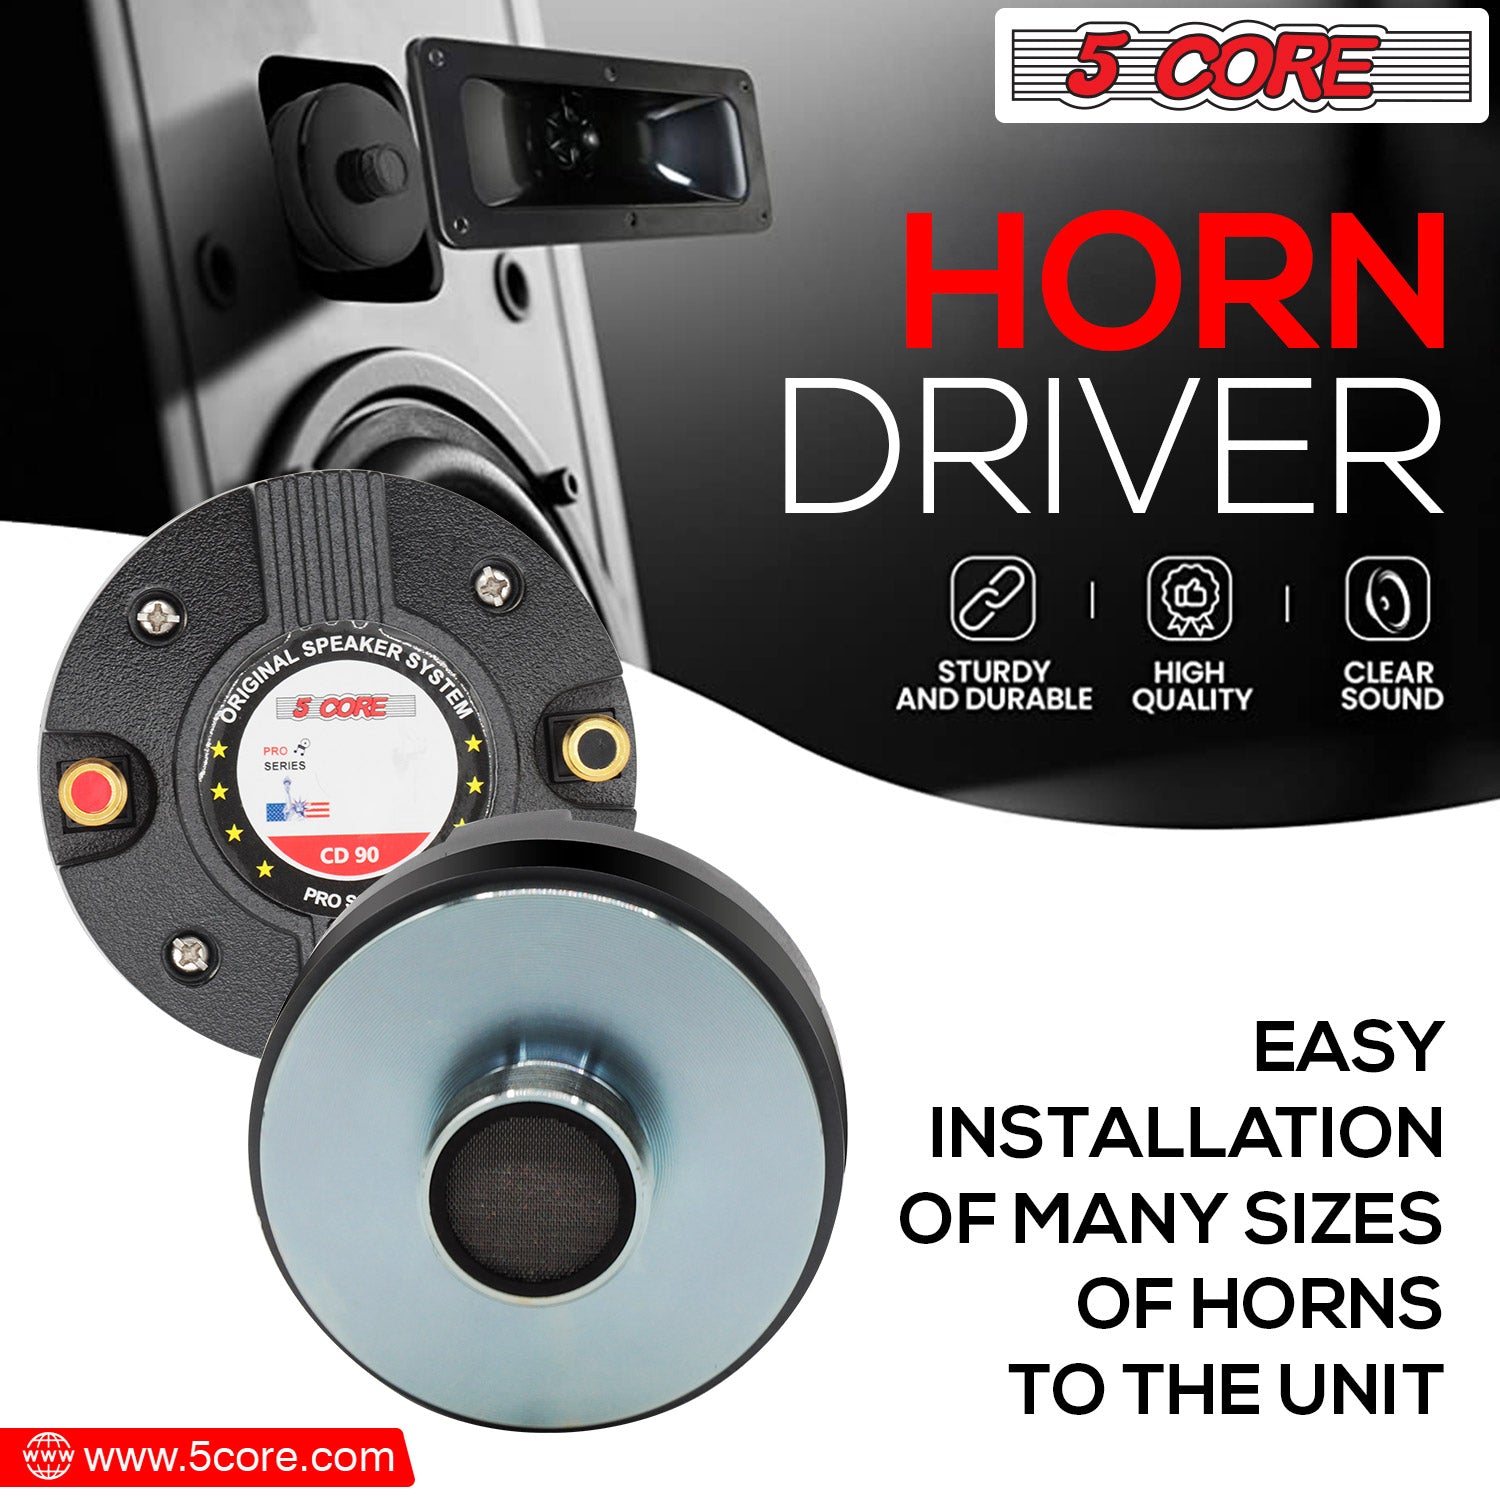 This Tweeter Compression Drive is Easy Installation of many sizes of horns to the unit.